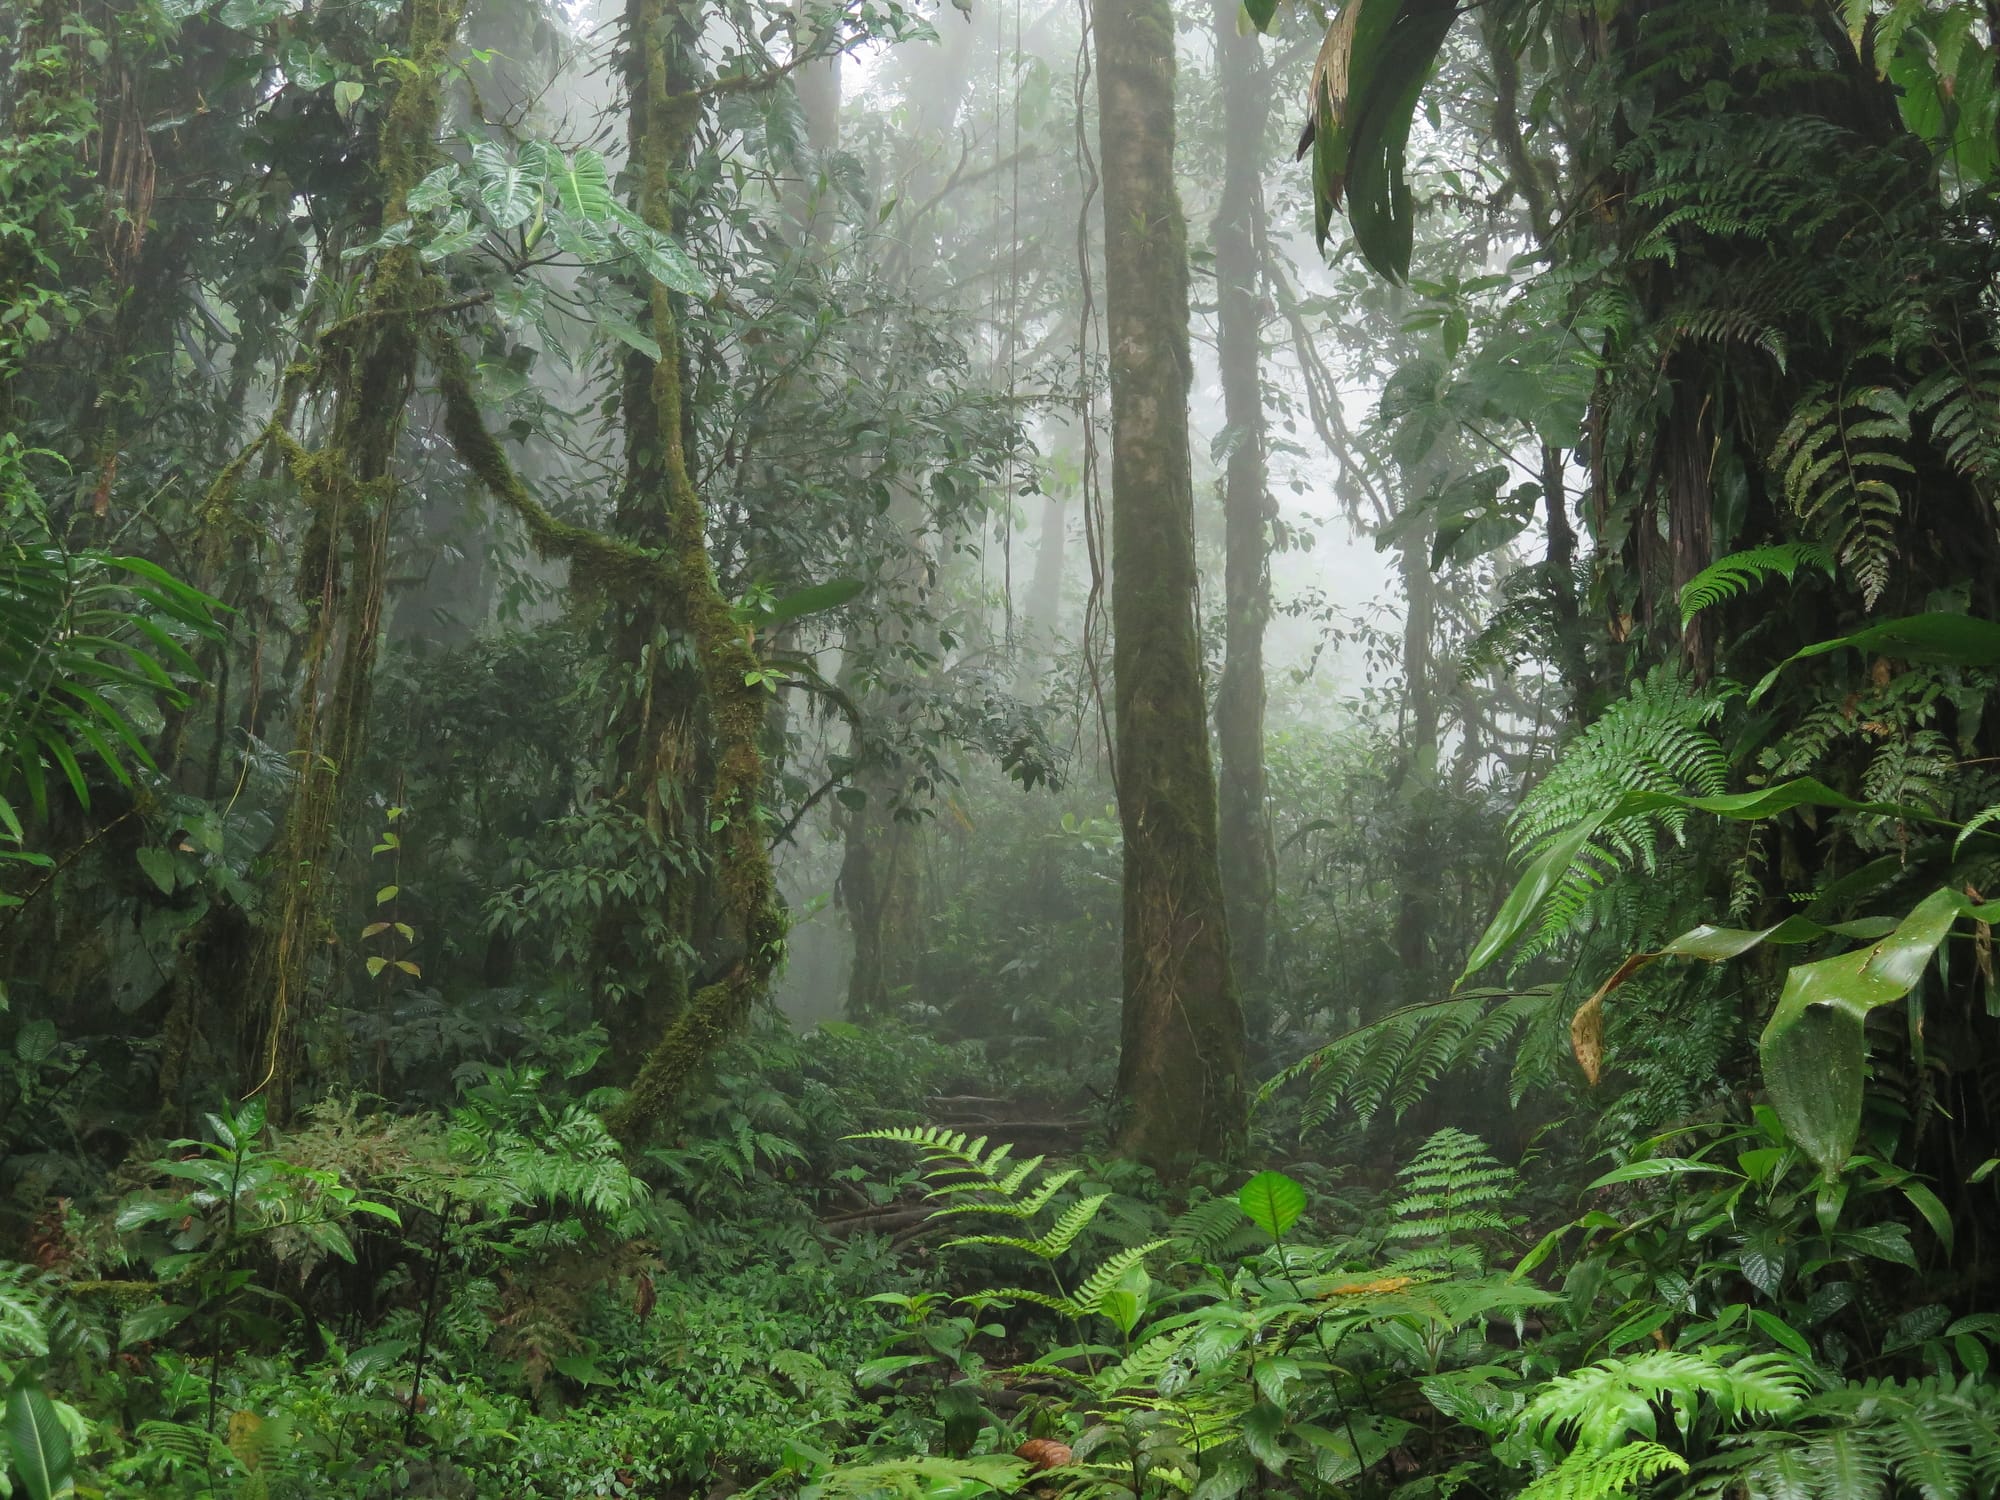 A lushly overgrown forest, misty, filled with trees dripping with leafy fines, and a multifarious carpet of ferns